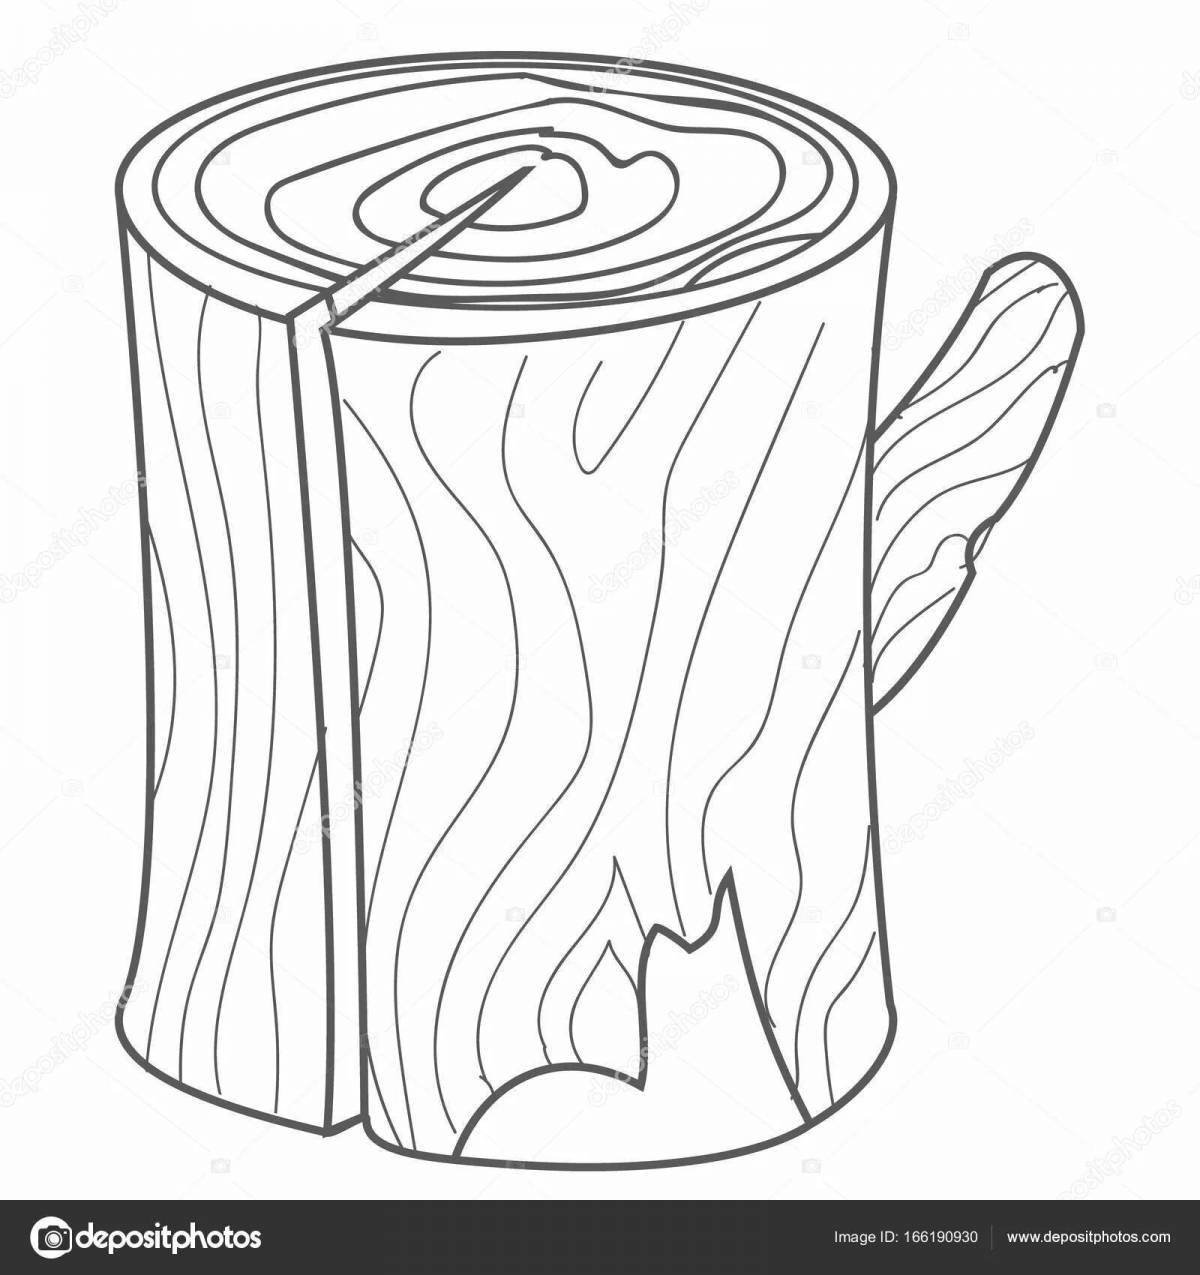 Glorious stump coloring page for kids